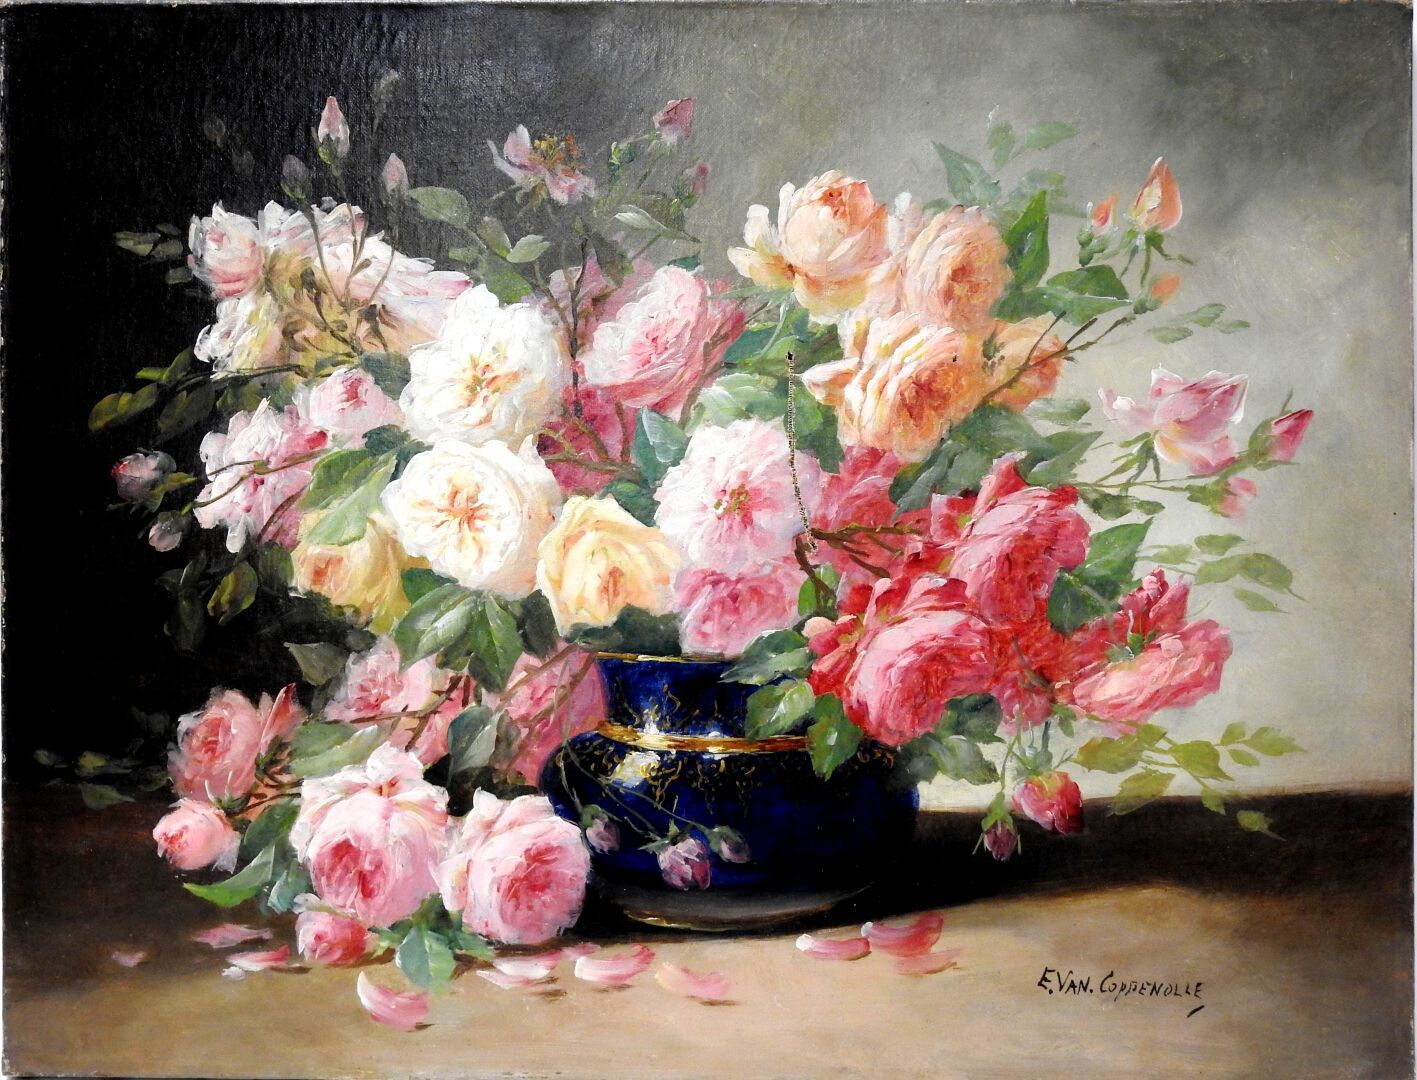 Null Edmond VAN COPPENOLLE (c.1843/46-1915)

Still life with a bouquet of roses.&hellip;